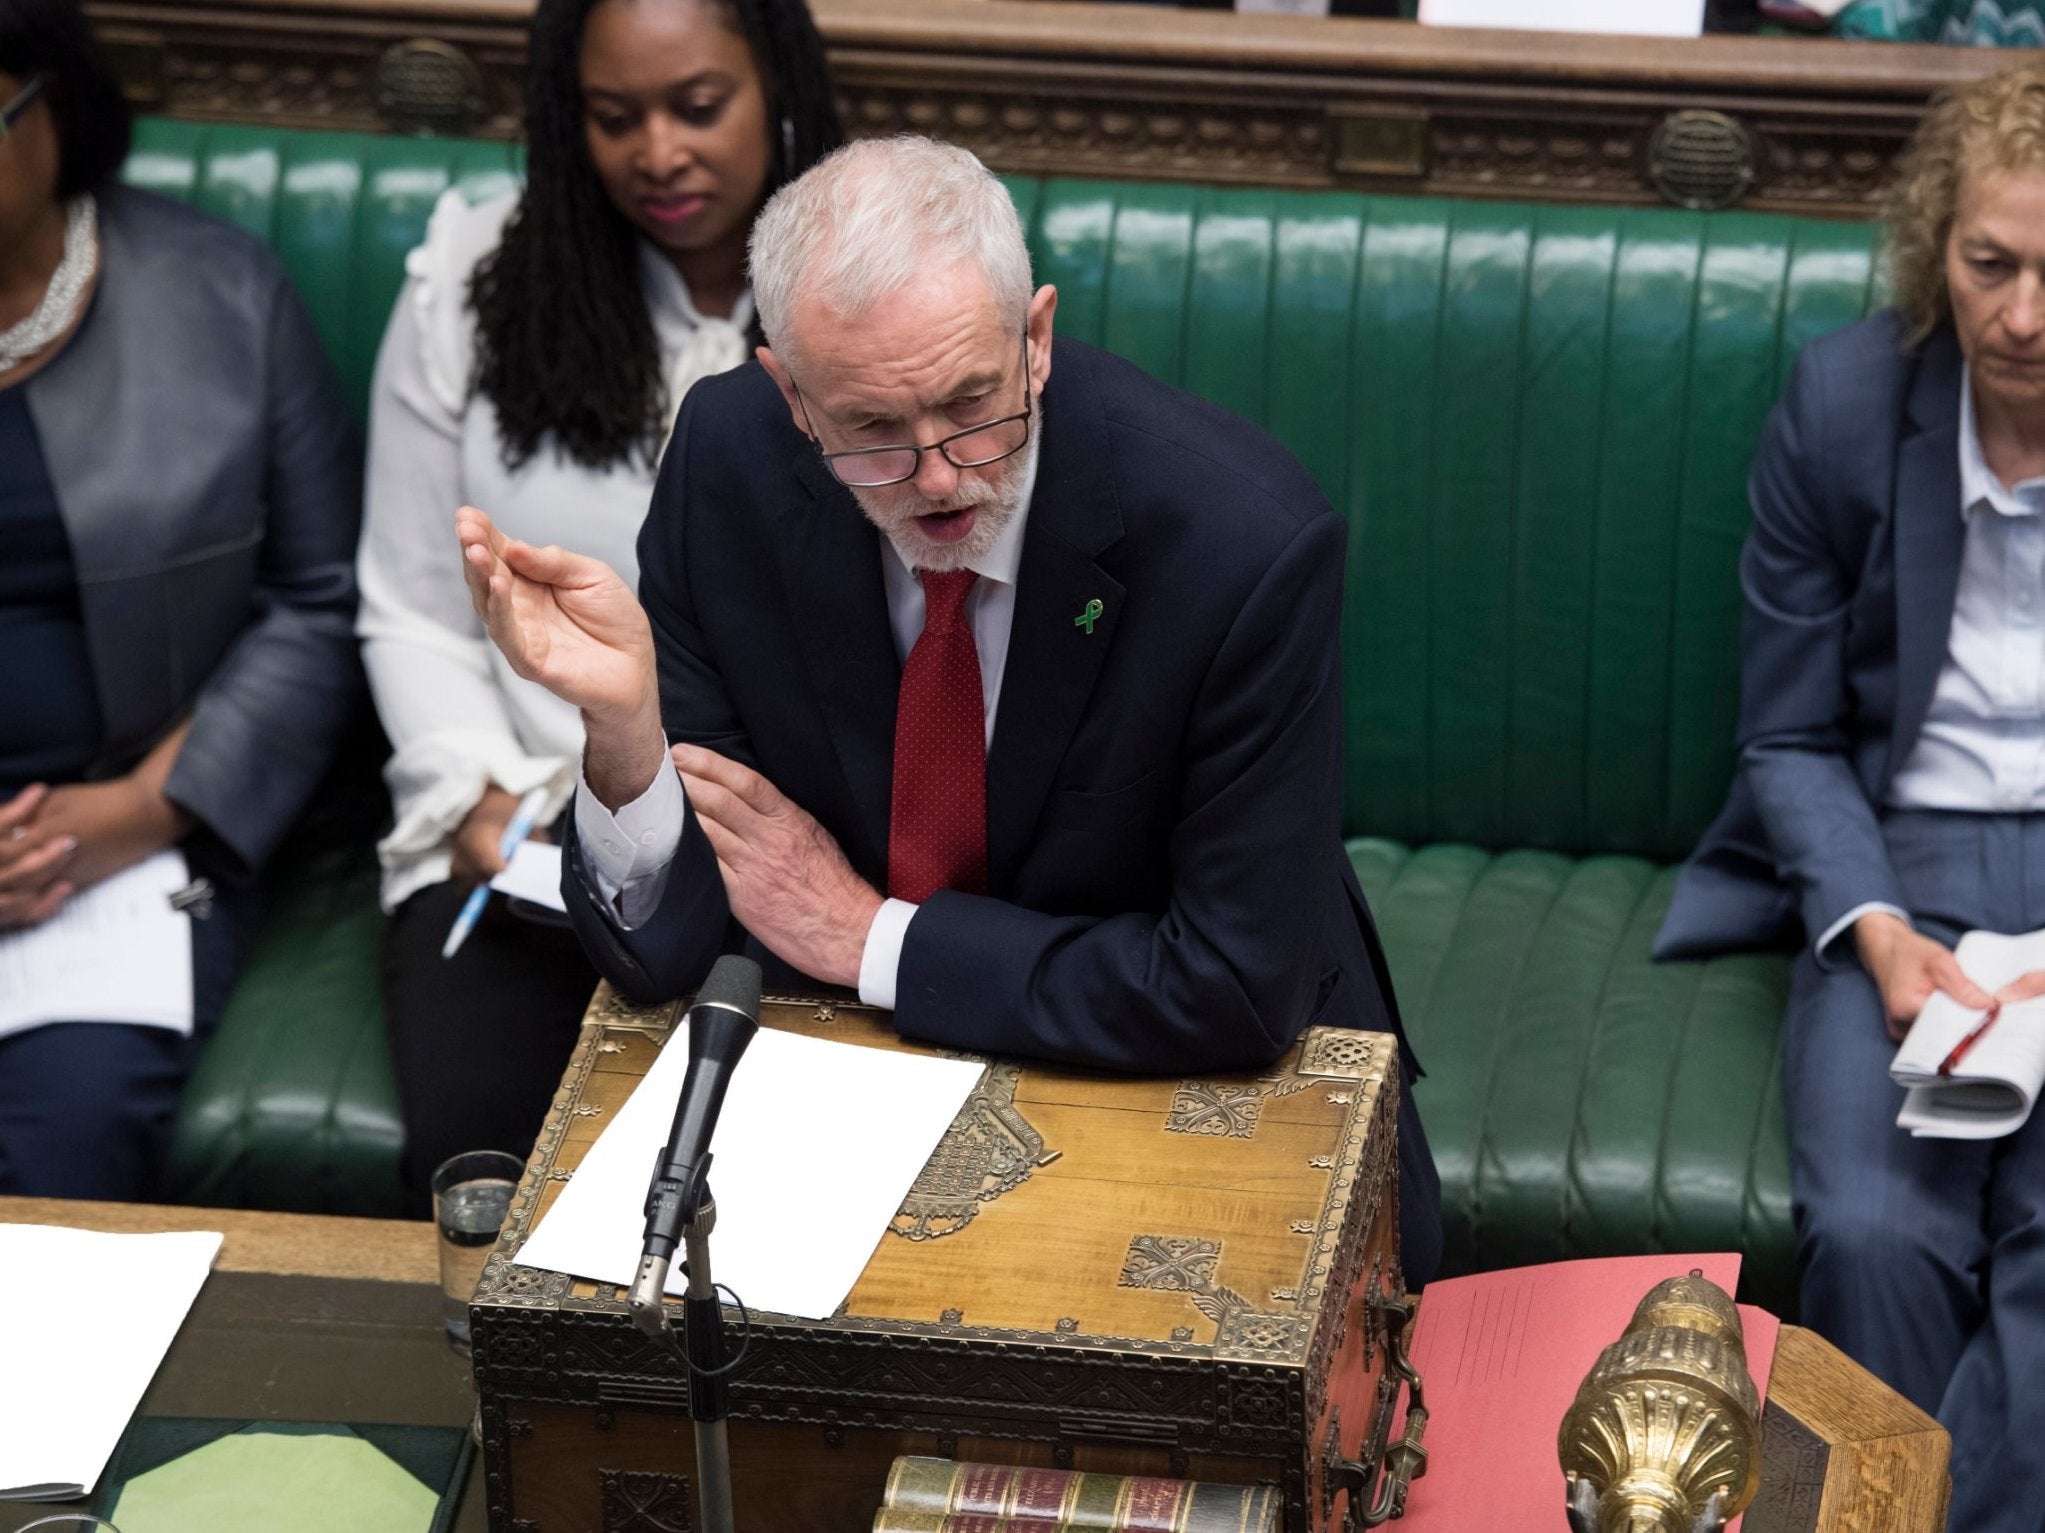 Brexit: Pressure builds on Corbyn to commit to vote against May's withdrawal bill